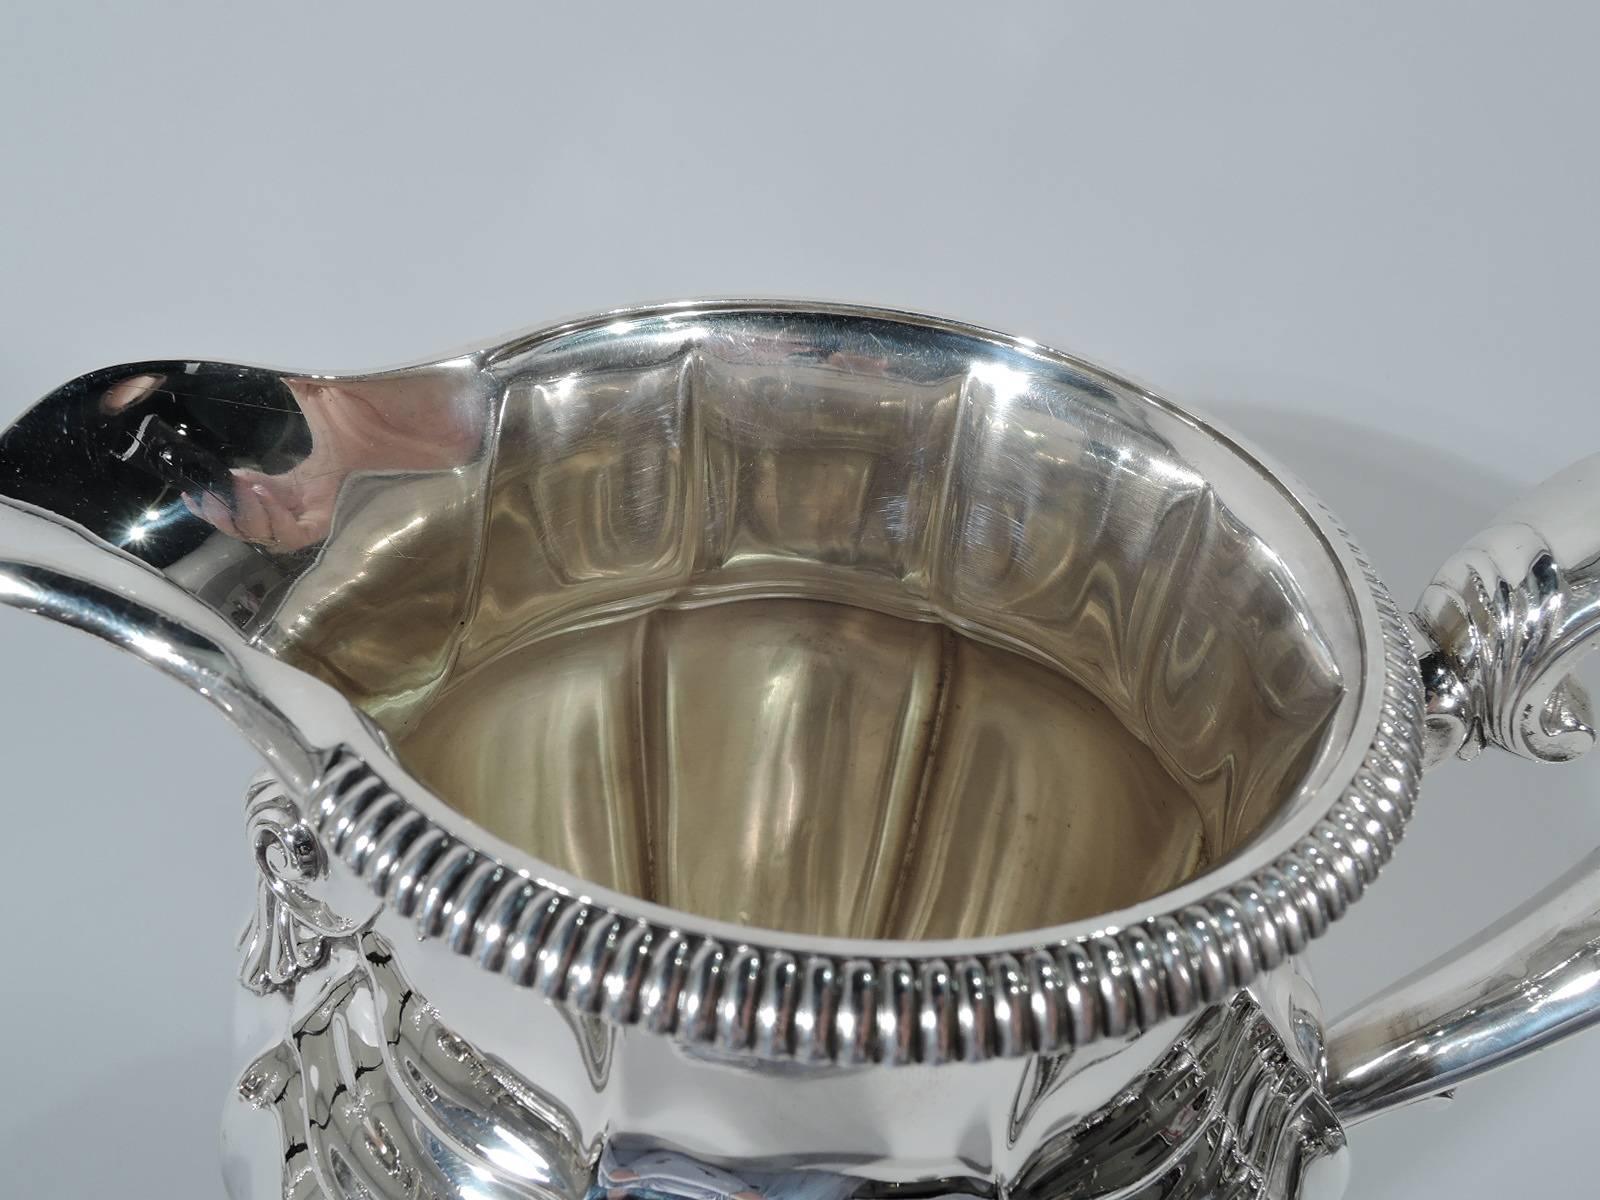 Classical sterling silver water pitcher. Made by Gorham in Providence, ca 1930. Lobed baluster with u-spout, capped scroll handle, and raised foot. Gadrooning. Volute scroll and scallop shell at spout base. Hallmark includes no. 531/1 and volume (4